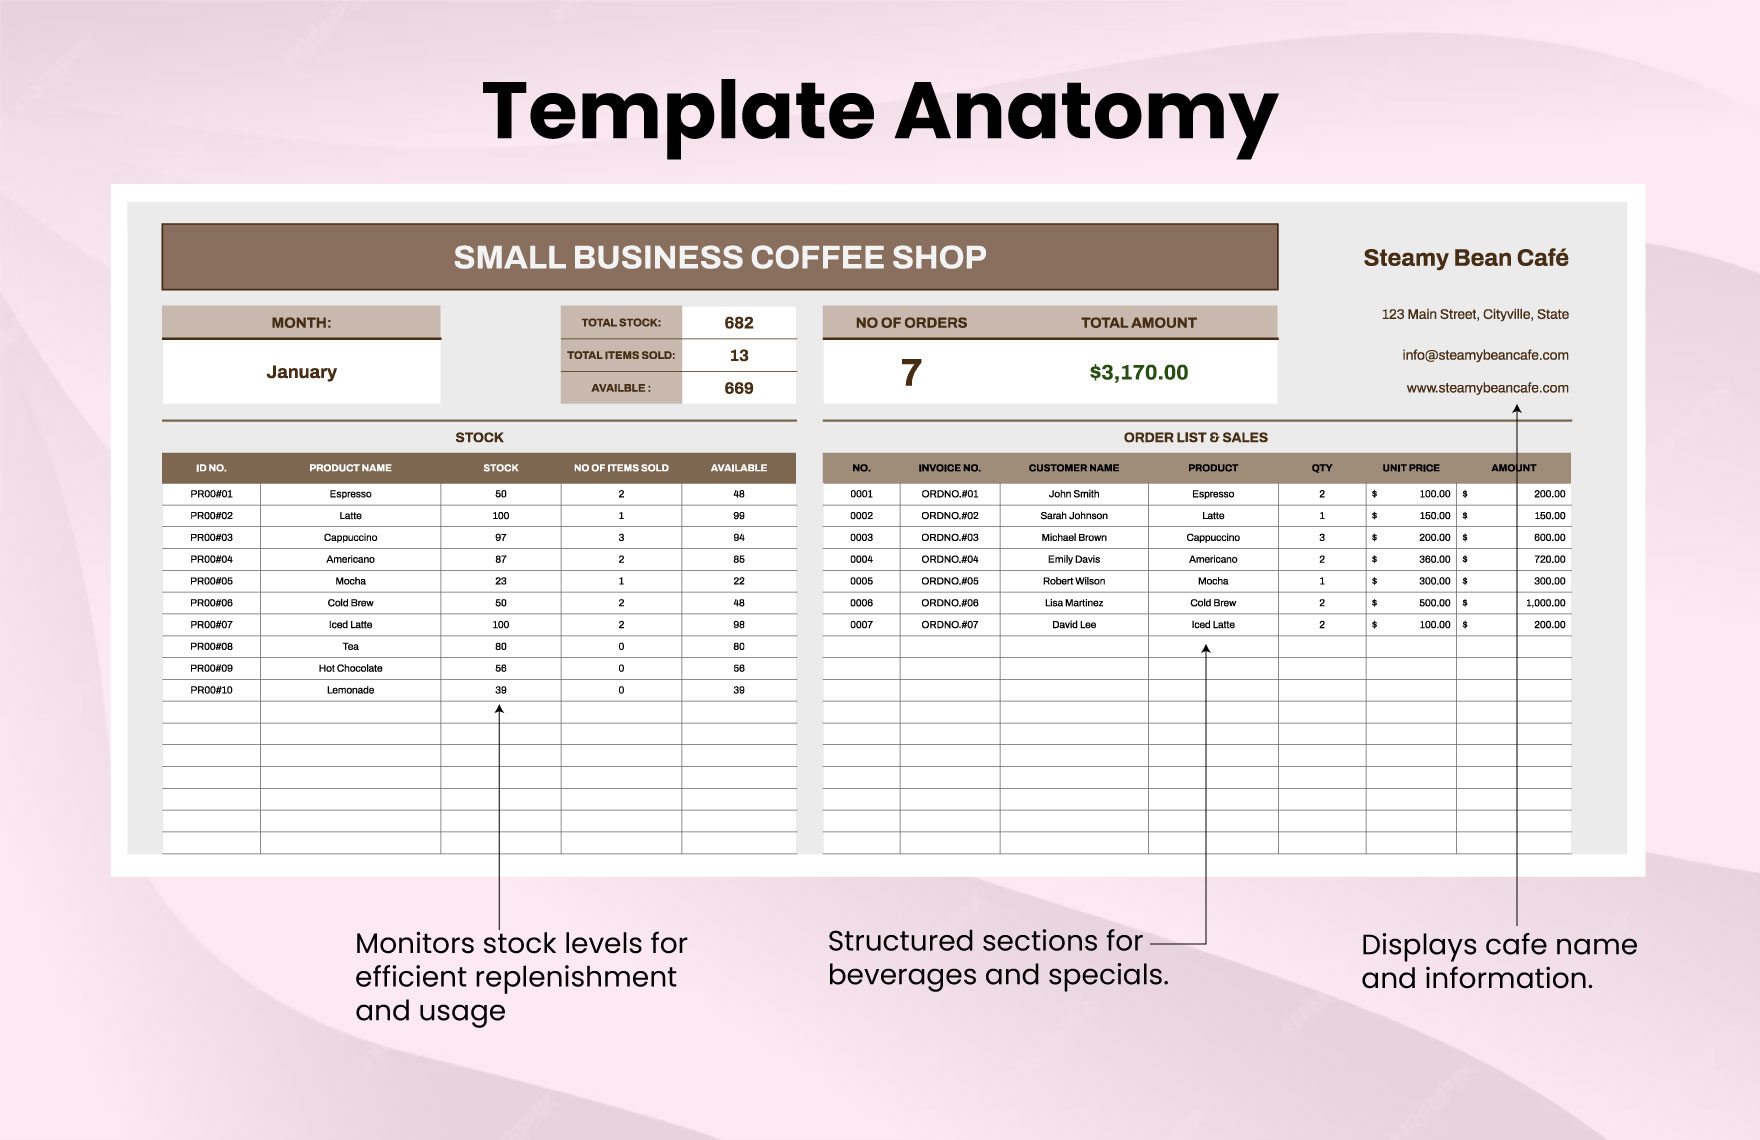 Small Business Coffee Shop Template